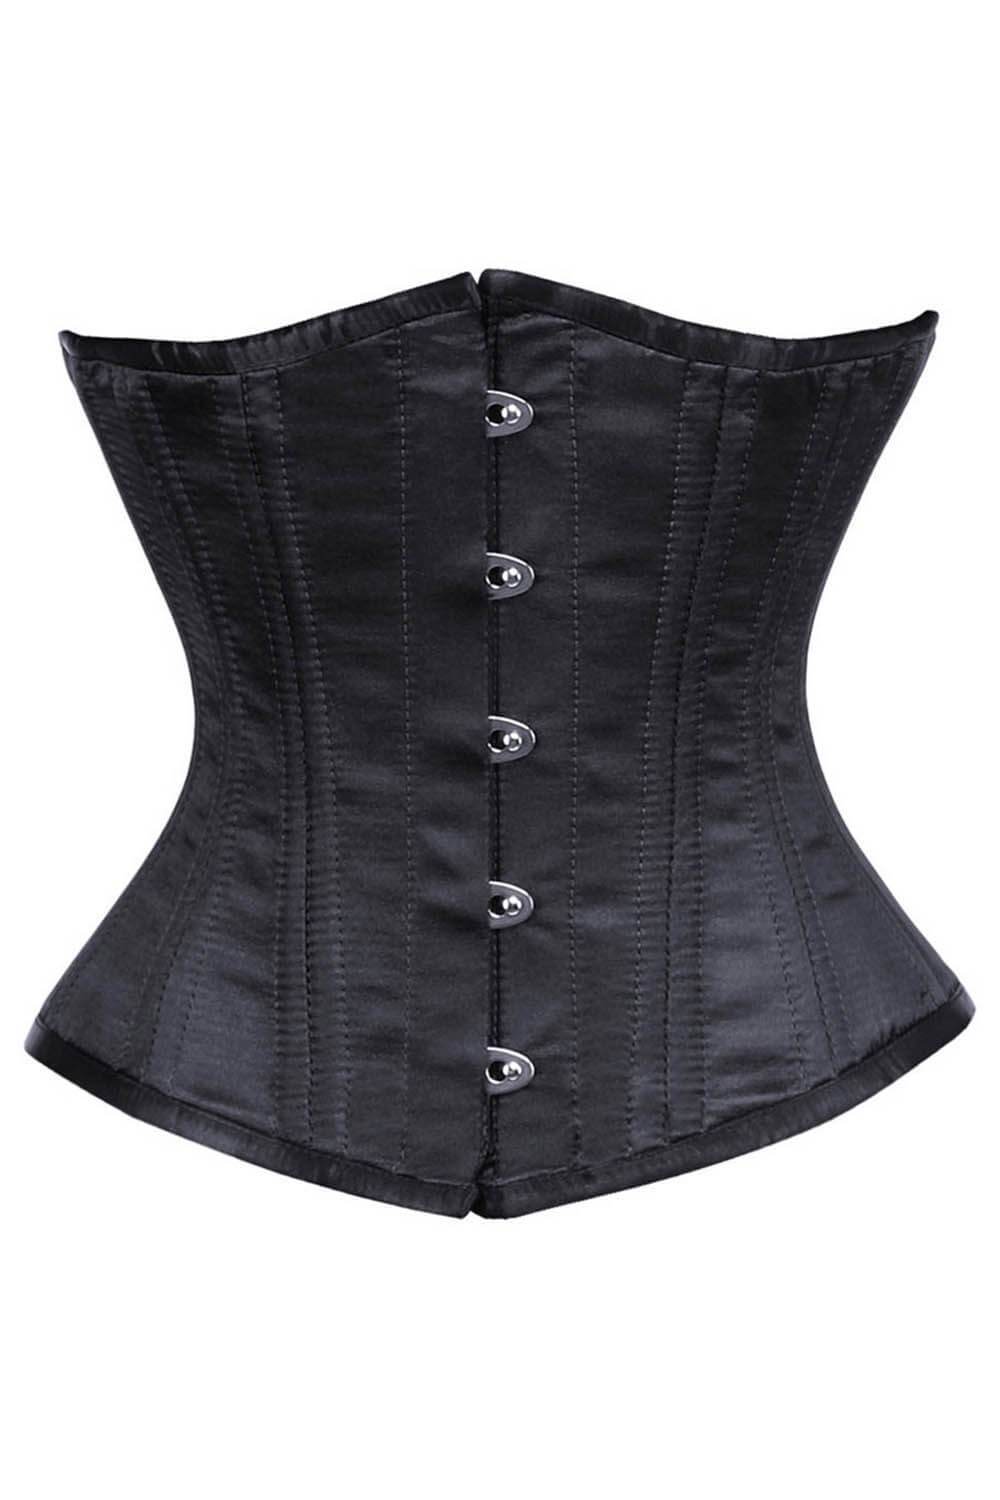 This Waist Trainer Satin Corset Is The Most Searched Styles Online